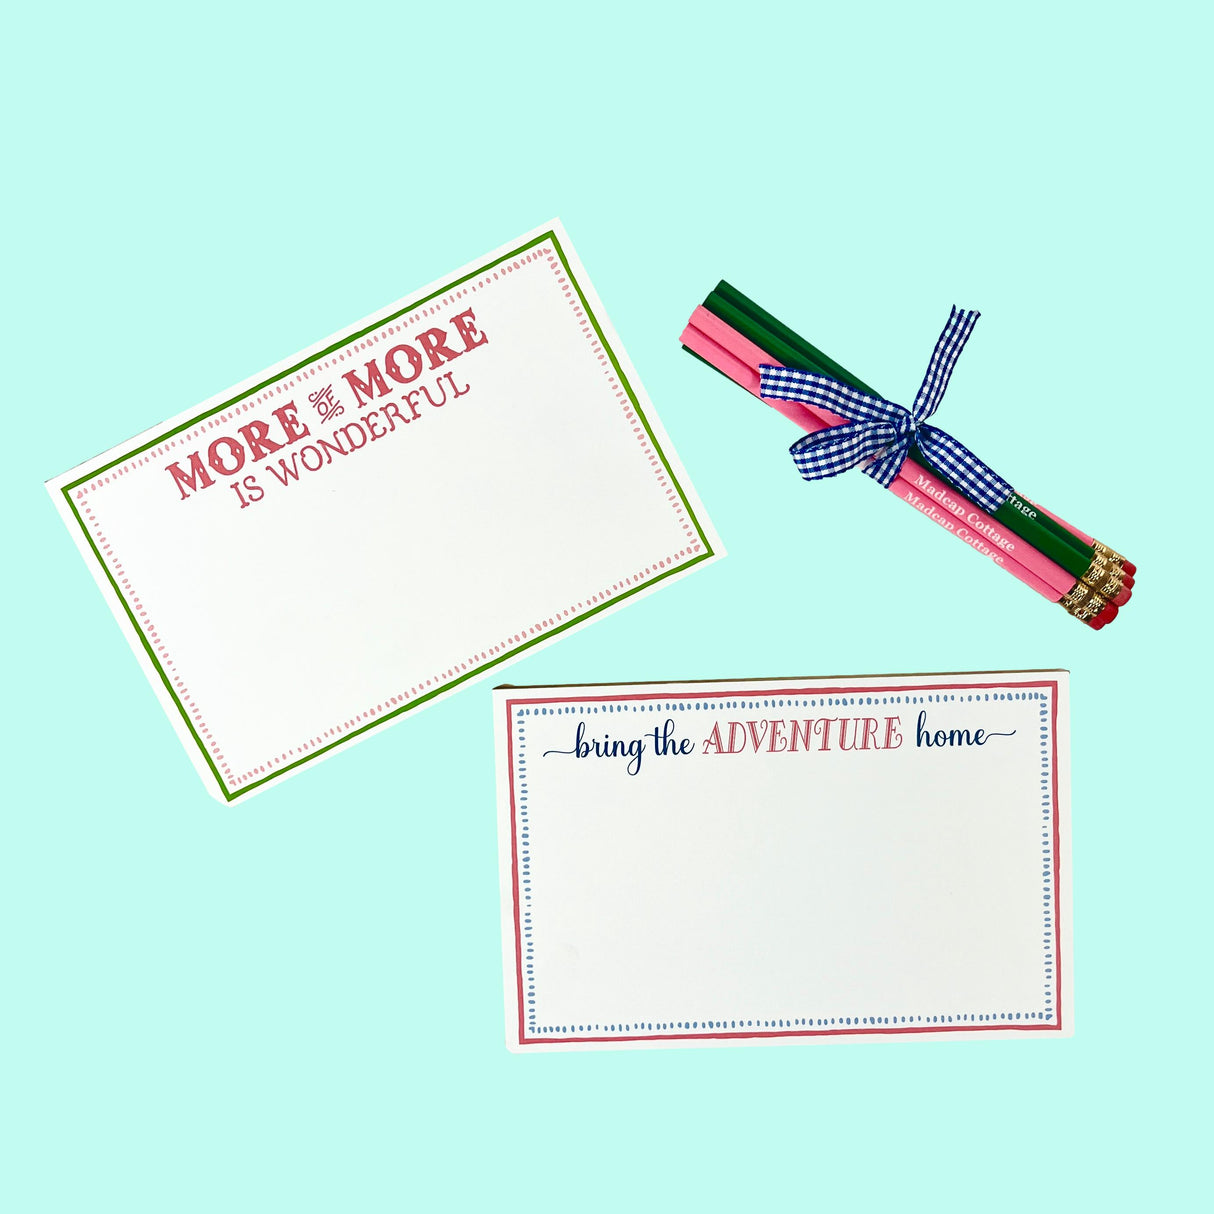 More of More is Wonderful Multicolor Stationery Set